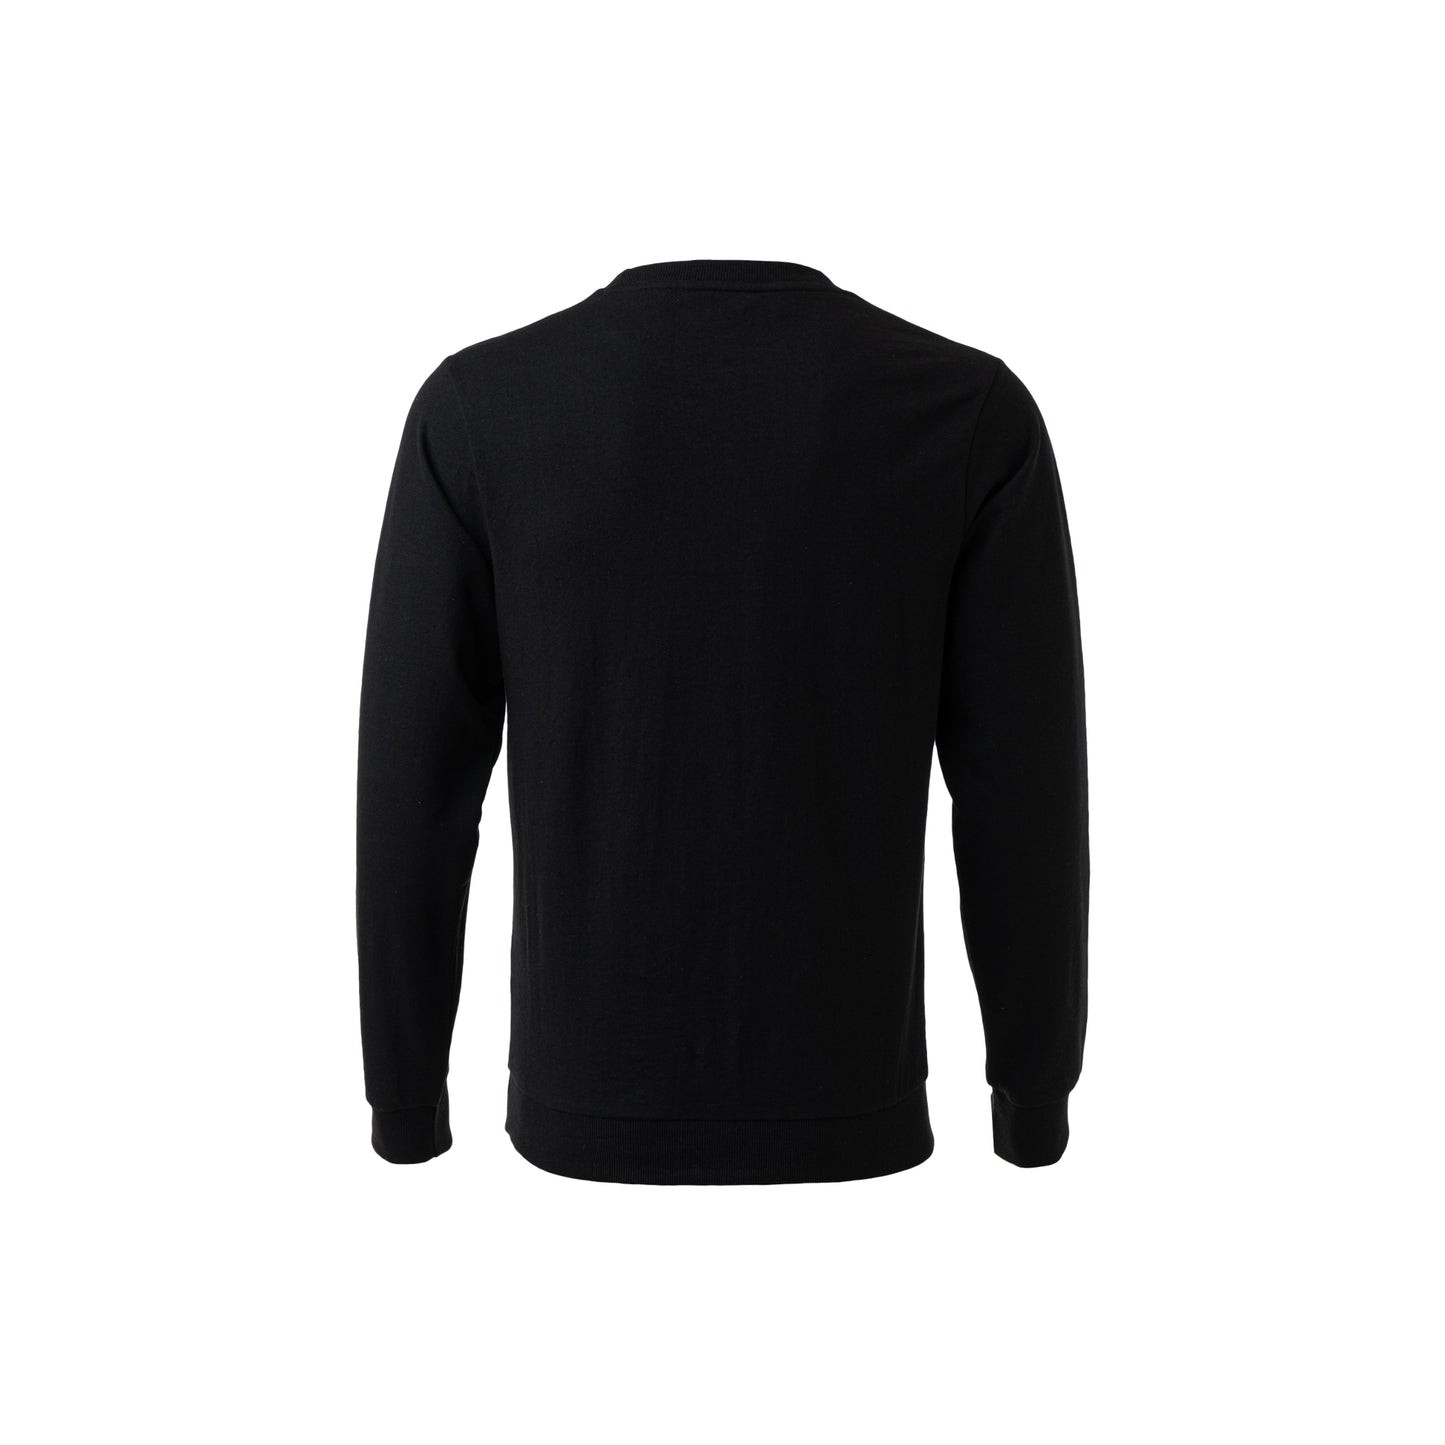 Men's Sweater - Racing Collection